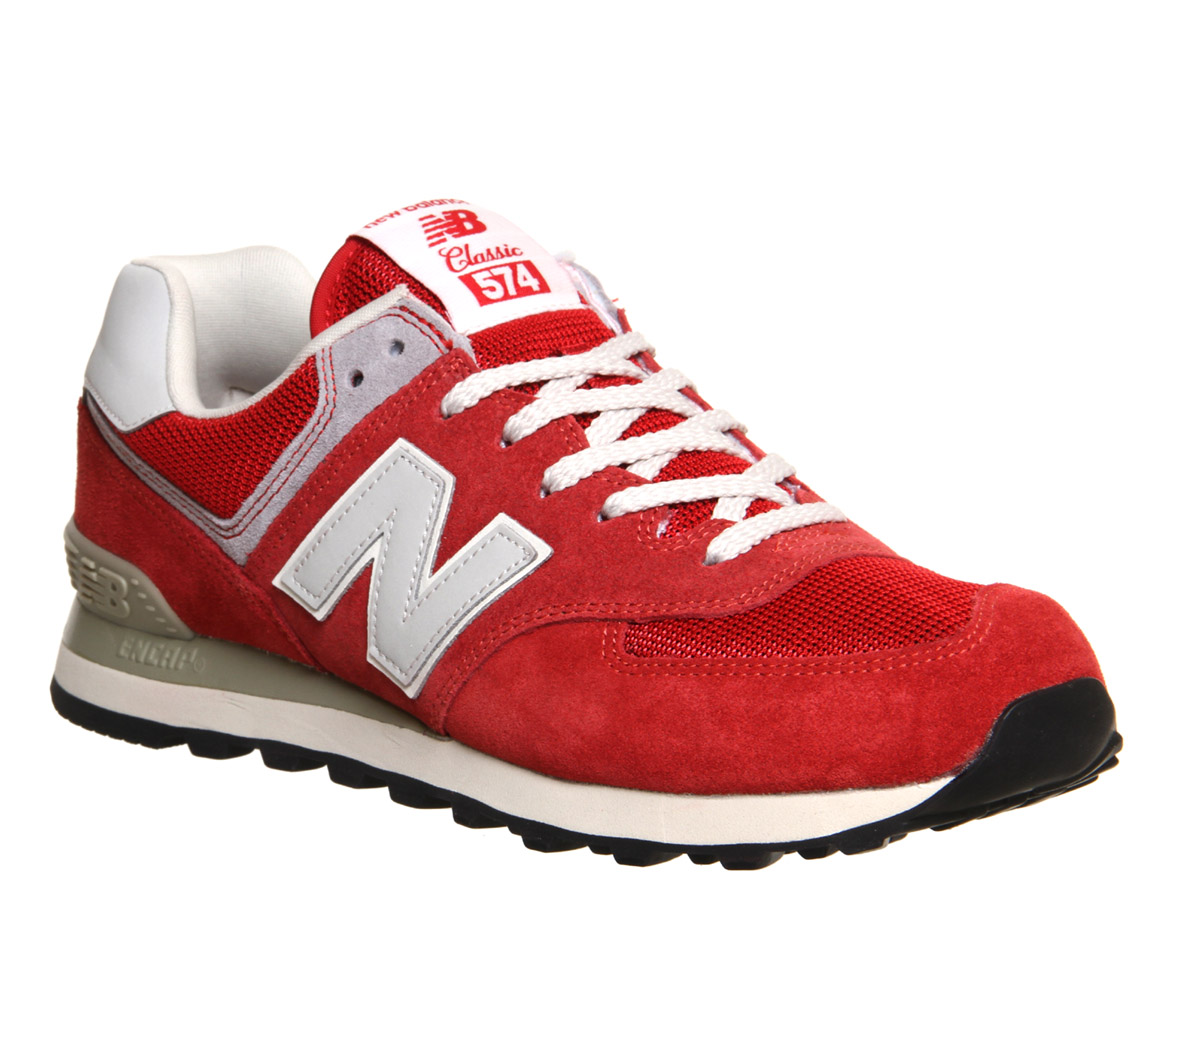 New Balance 574 Denim Red - His trainers